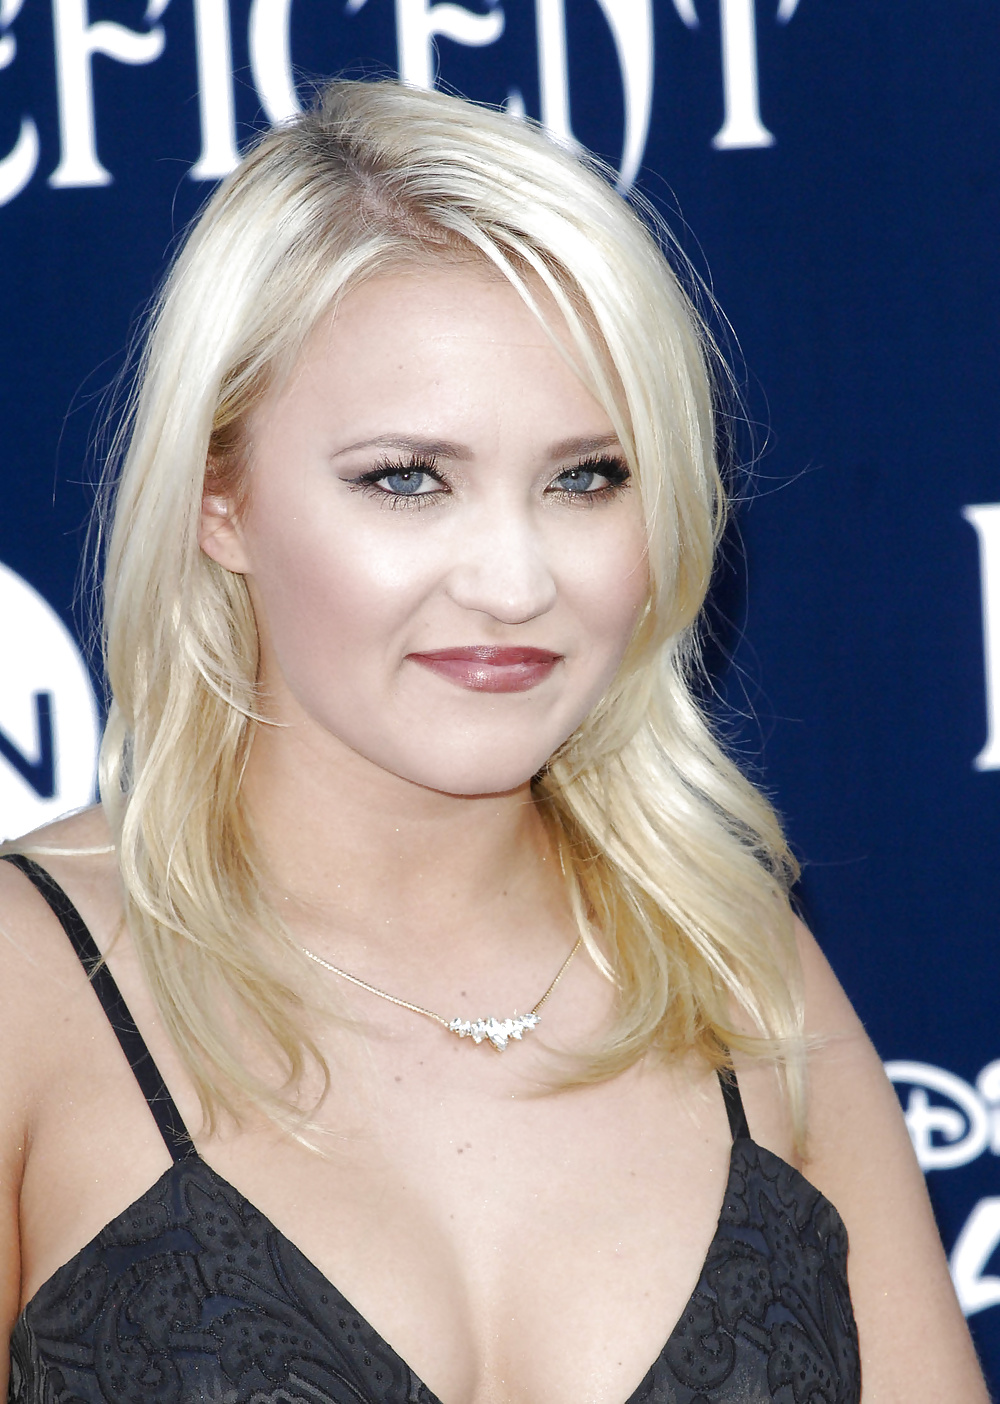 Emily osment - busts out for disneys maleficent
 #26674558